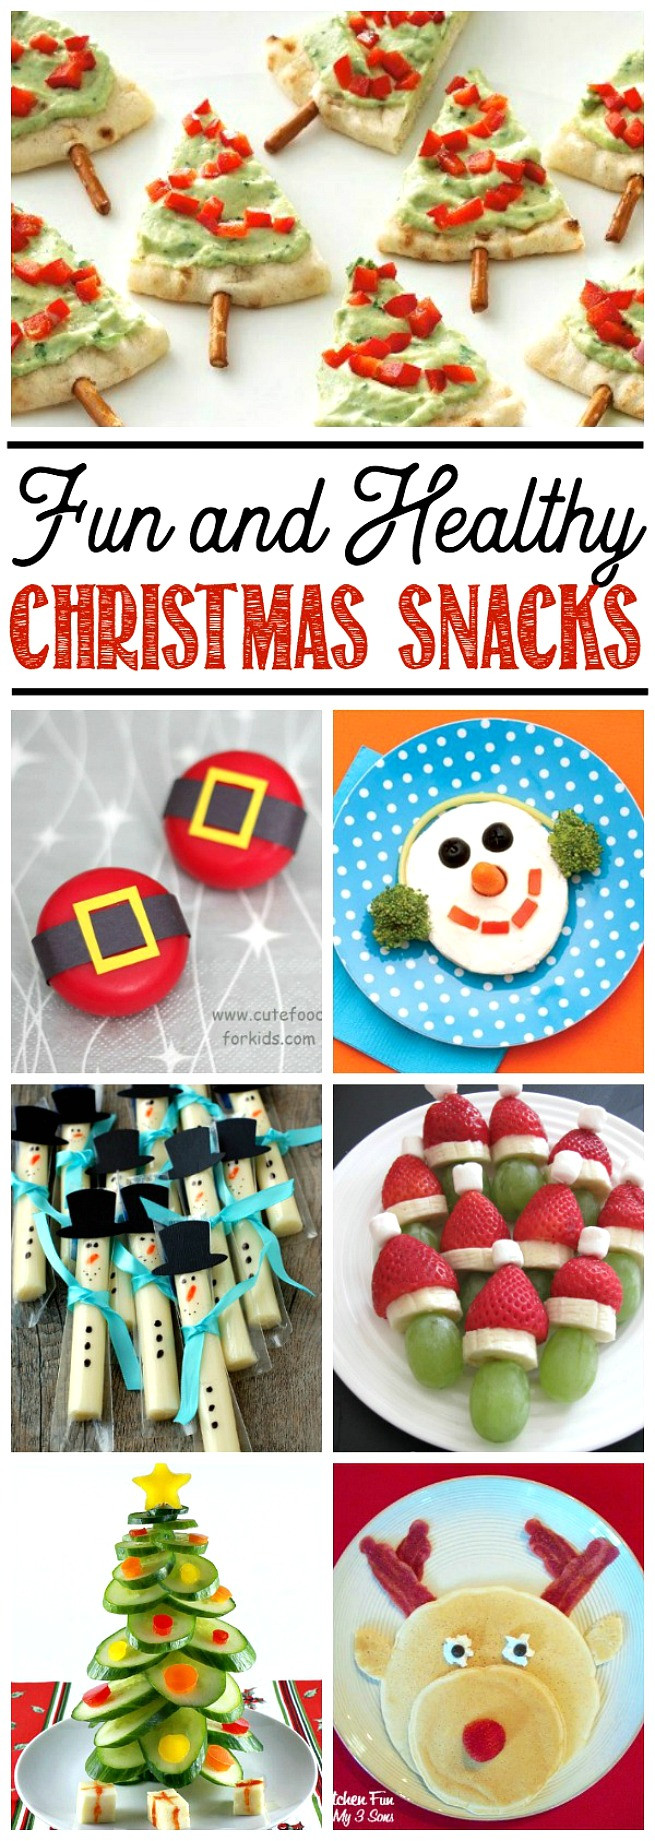 Christmas Class Party Food Ideas
 Chocolate Rice Krispie Gingerbread Men Pops Clean and